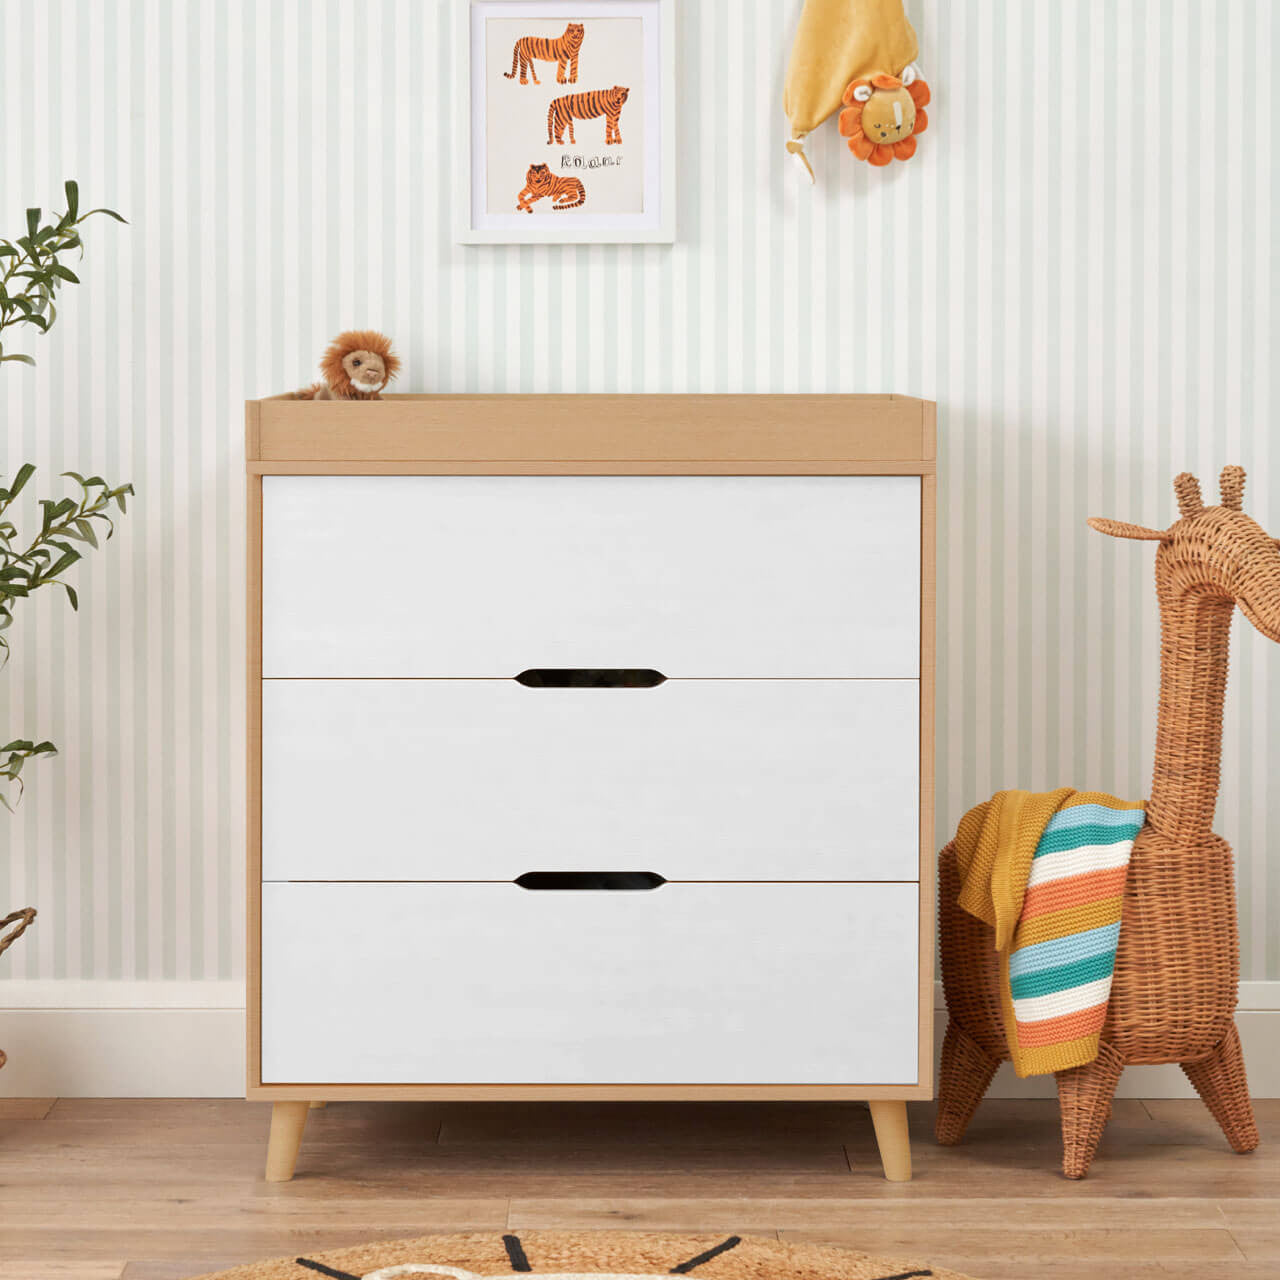 Tutti Bambini Hygge 2 Piece Room Set - White/Light Oak - For Your Little One